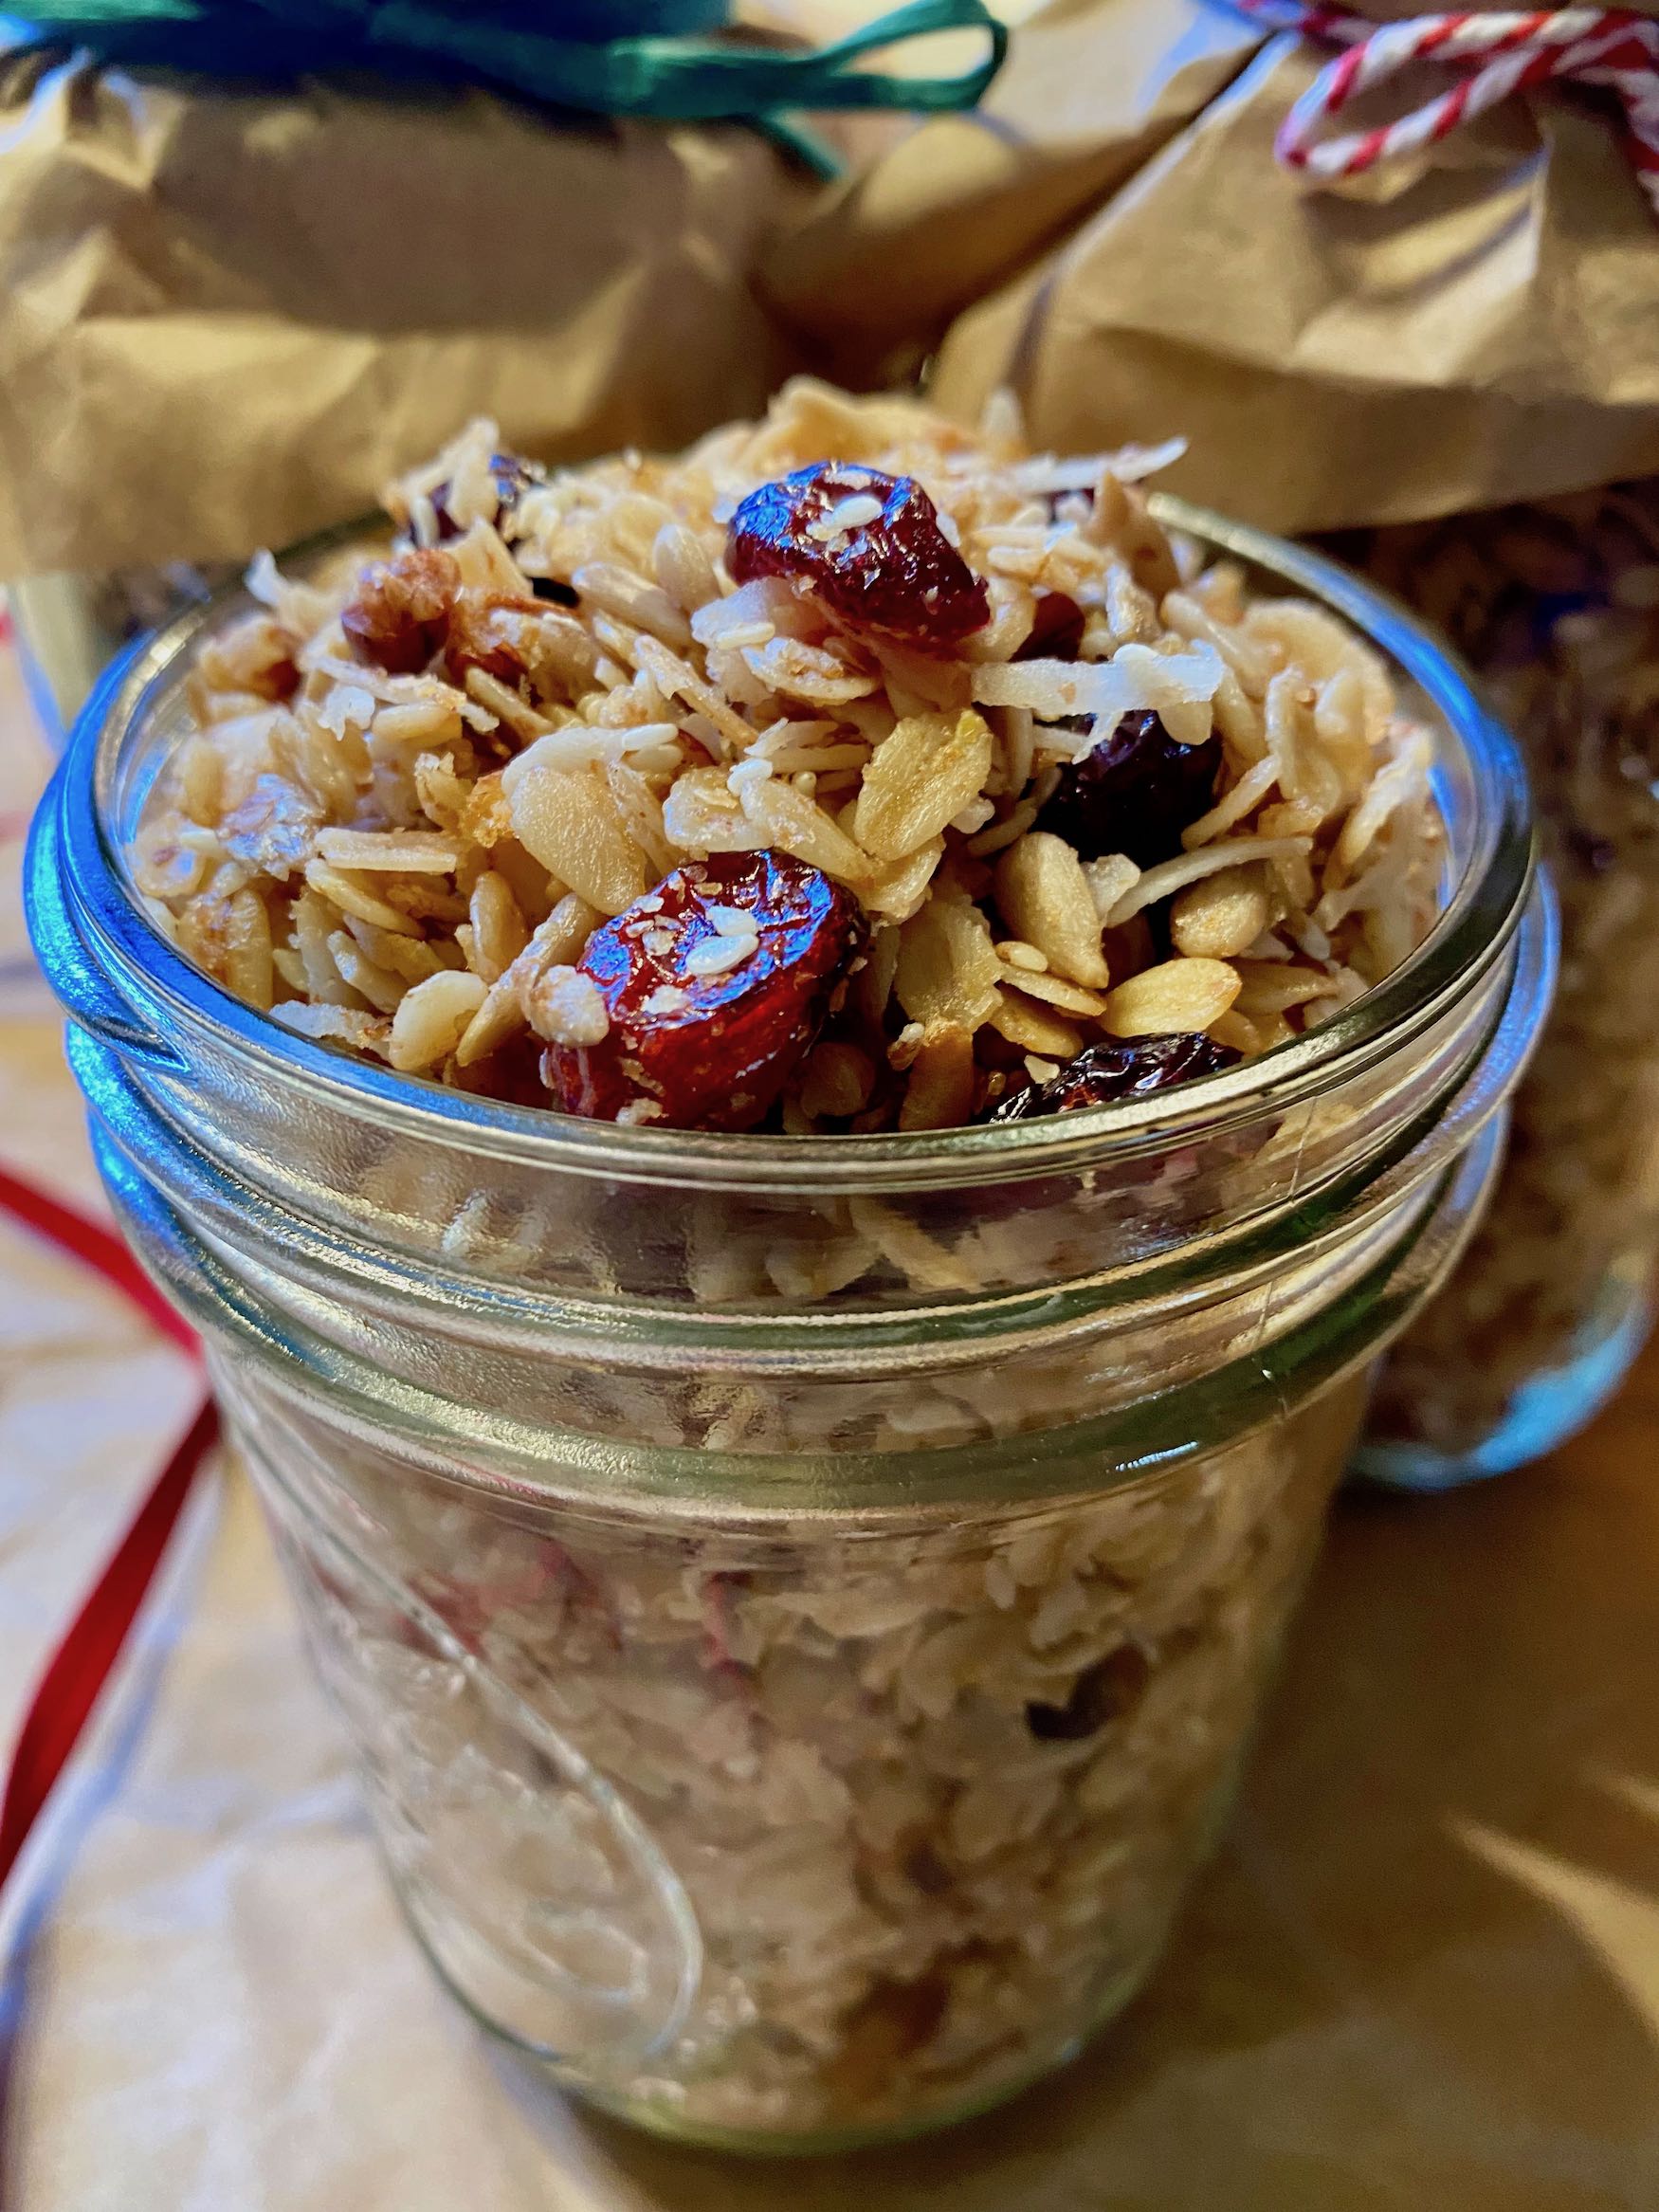 Jars of Maple Nut Granola, Some Wrapped for Gifts